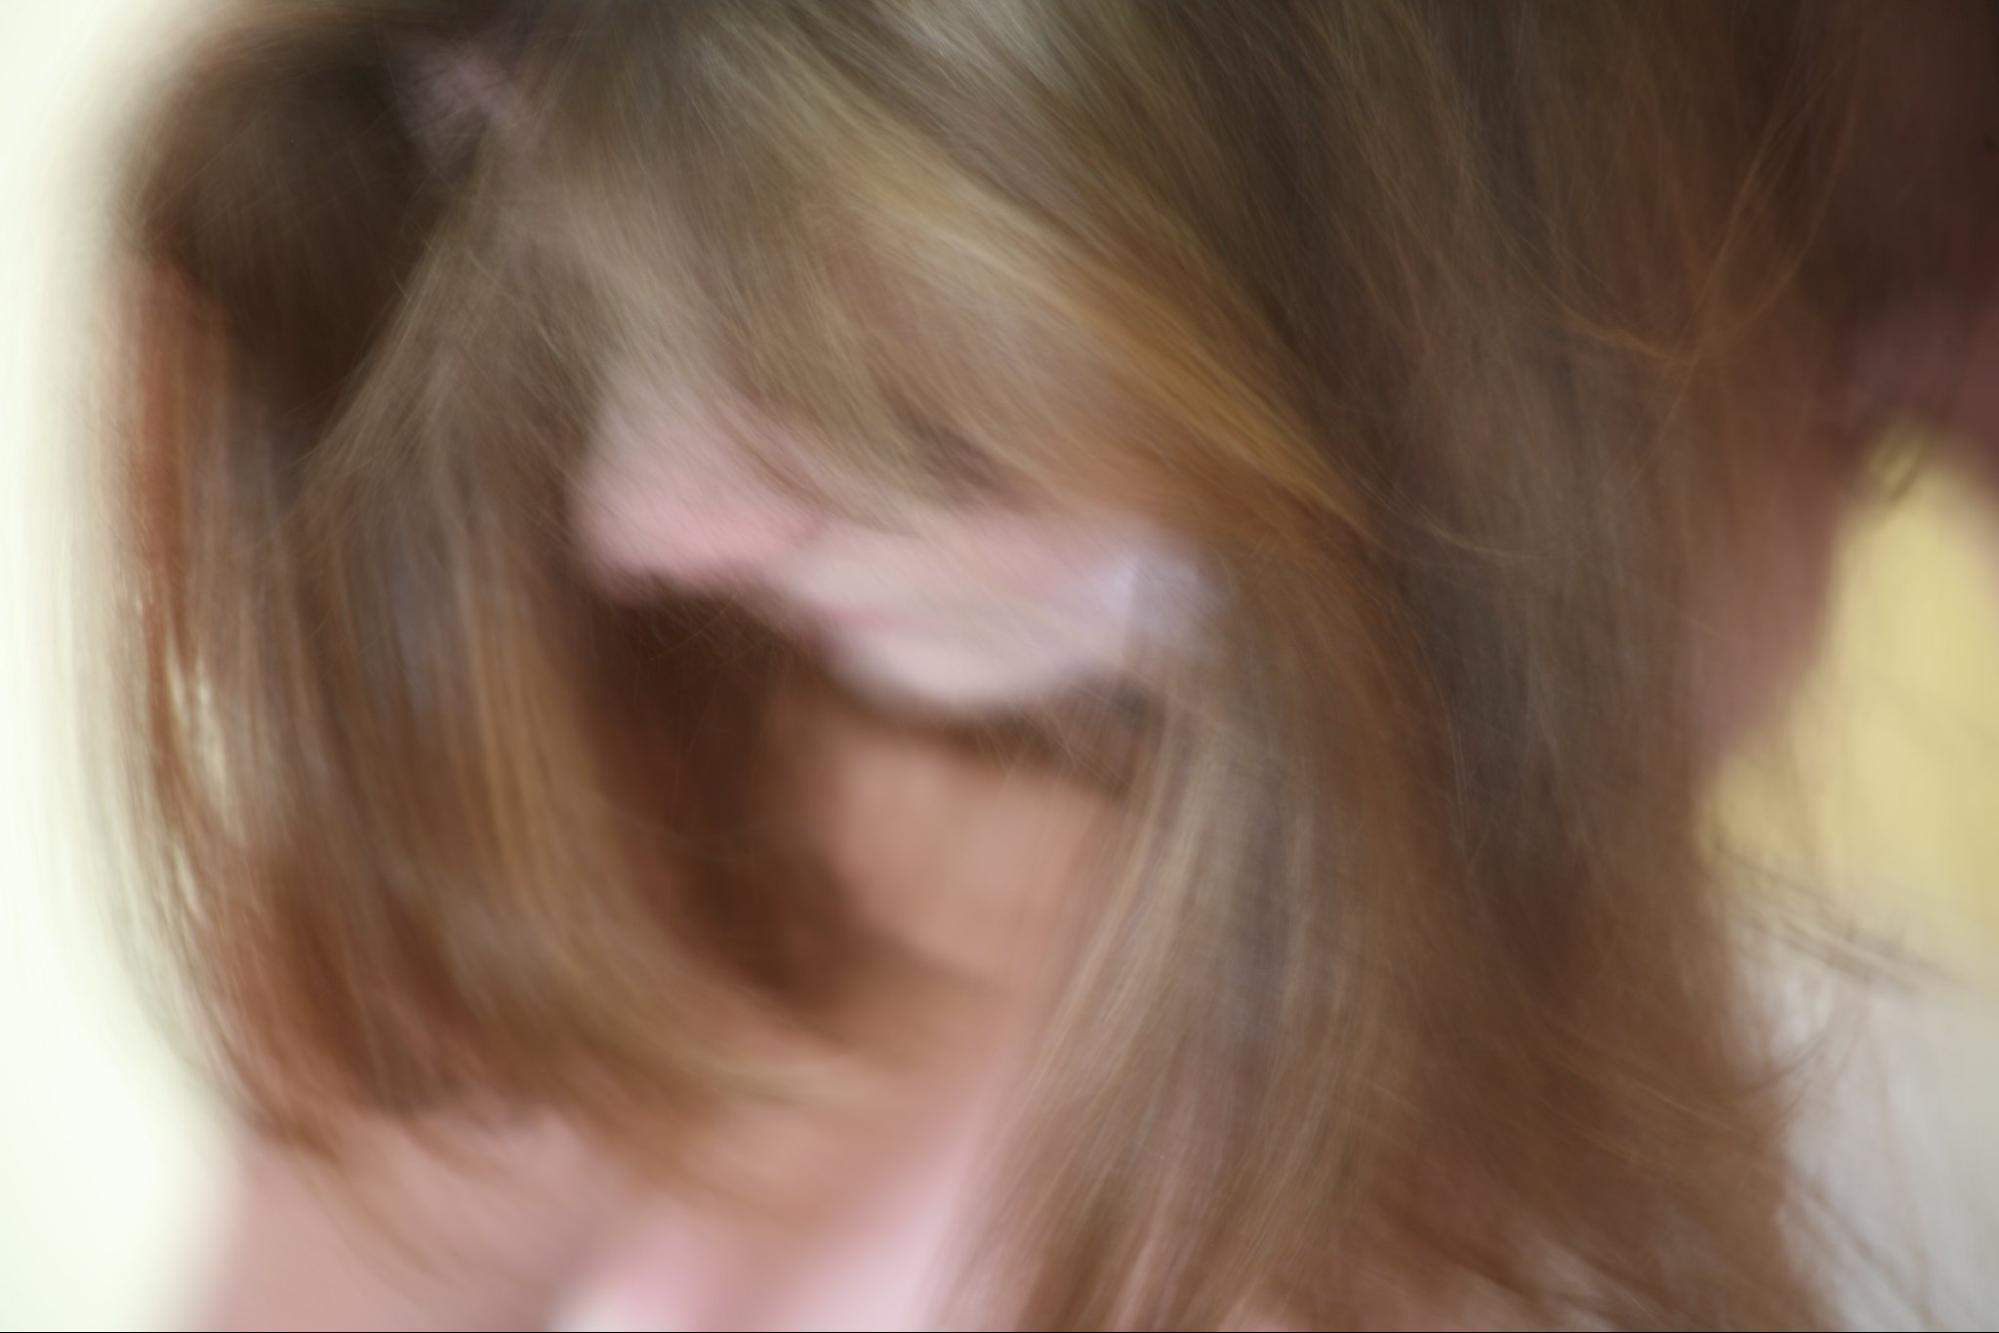 close-up and blurry image of long hair